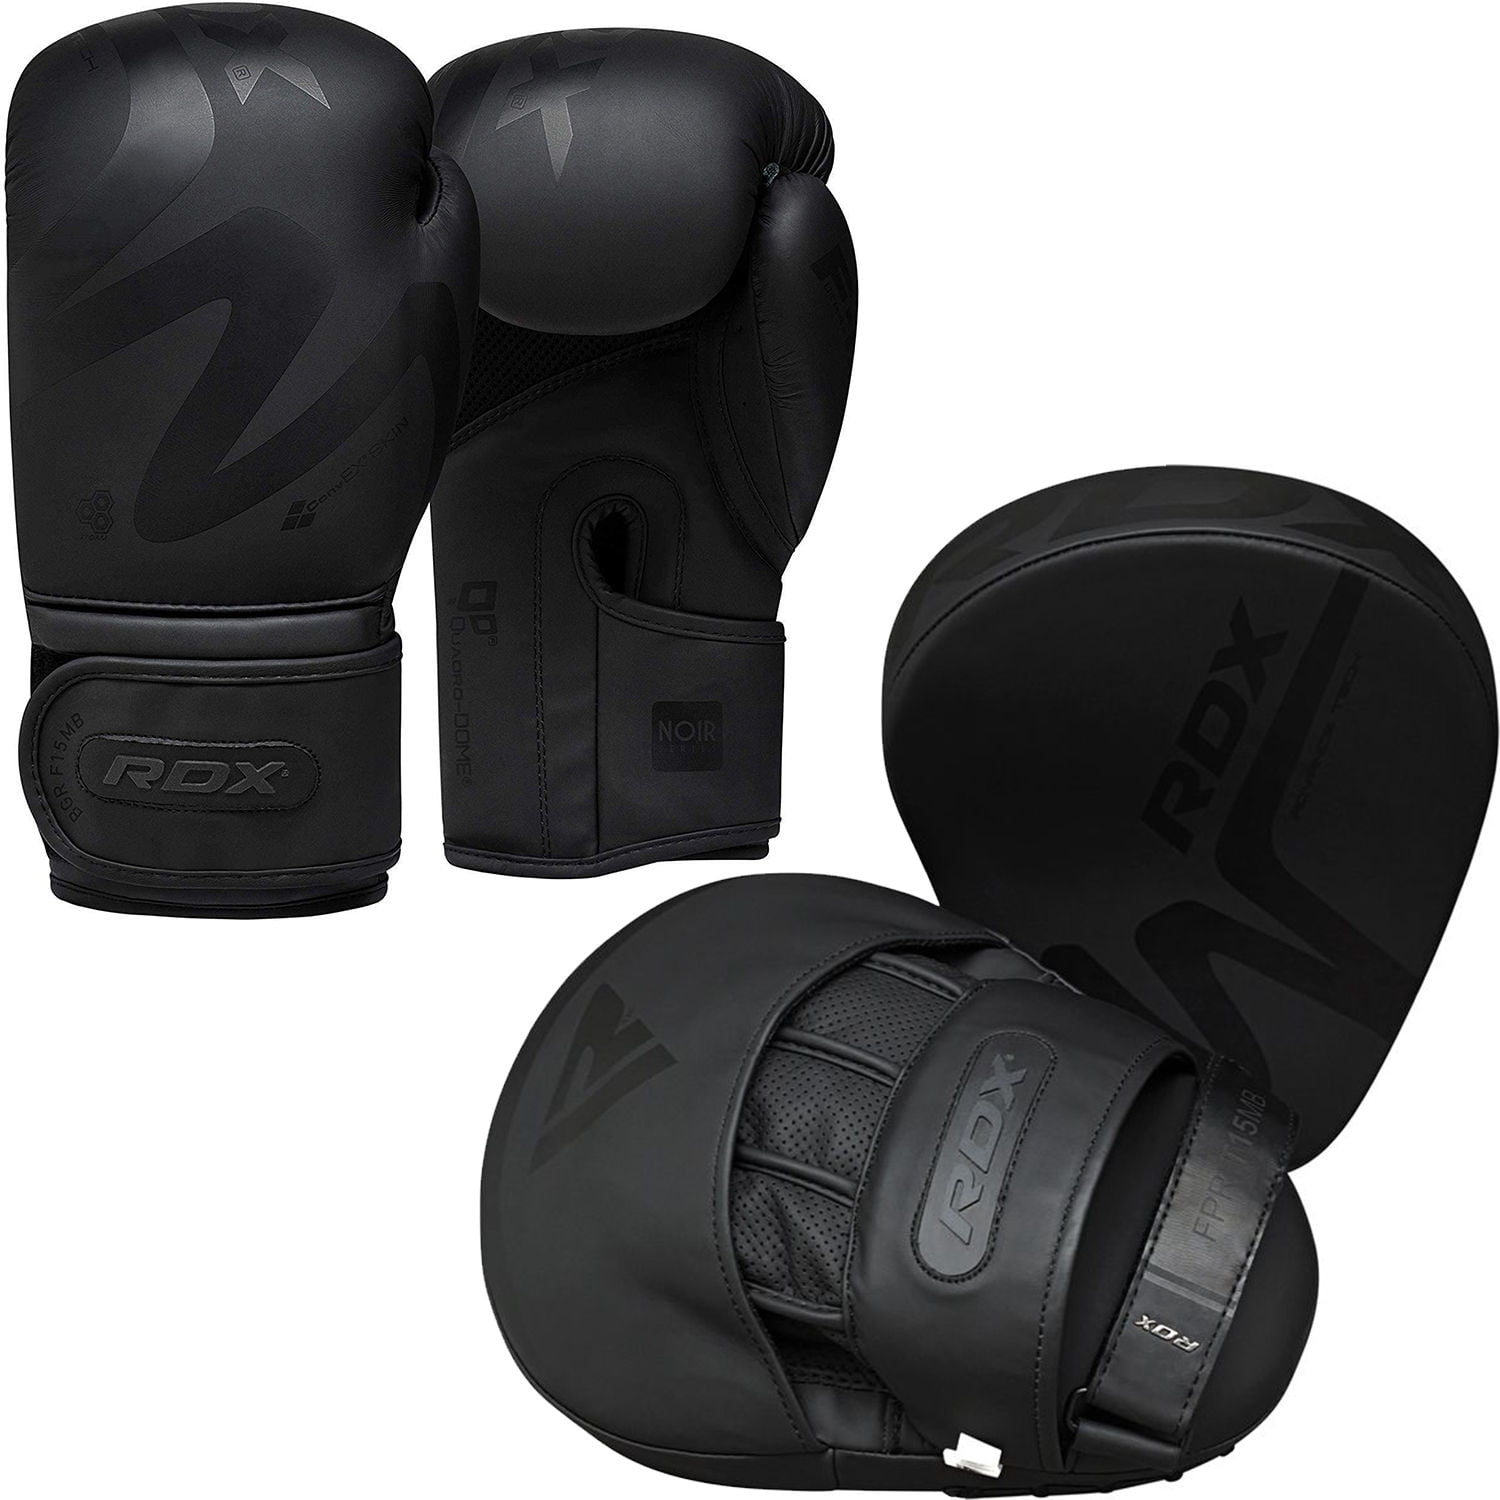 Boxing Pads Sparring Gloves Pair of Boxing Punching Pads Mitts Gloves Sanda pad 